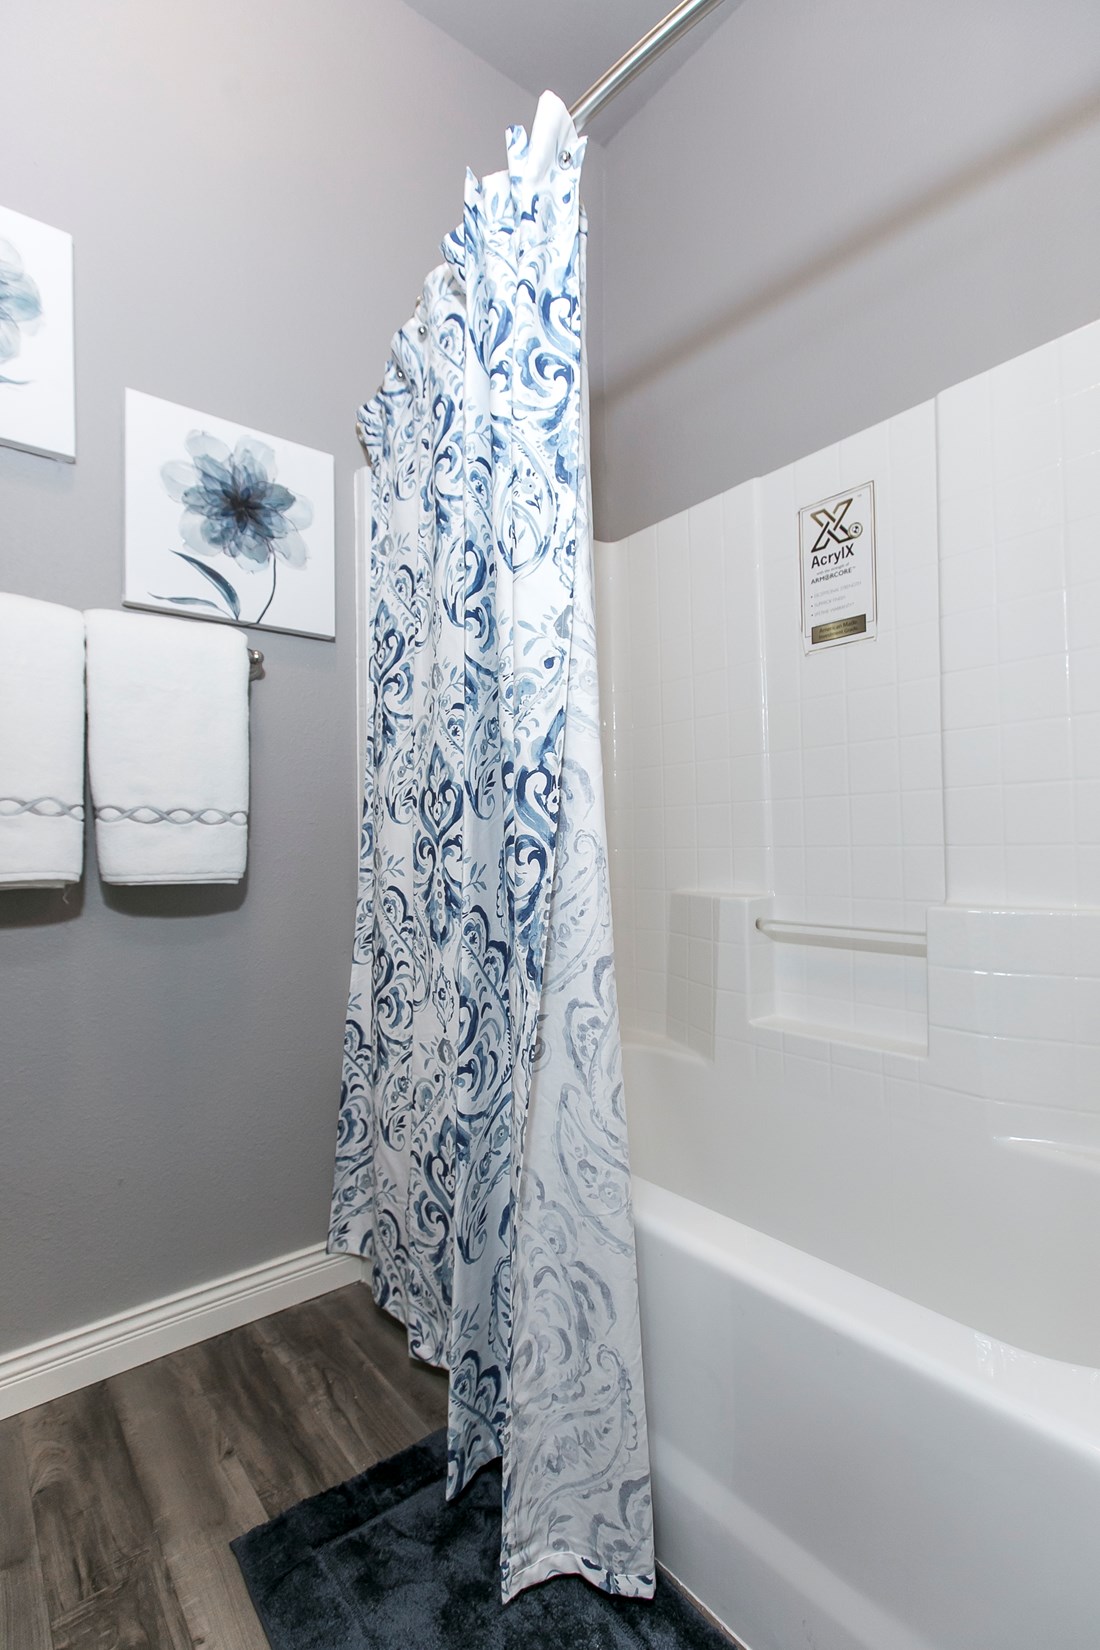 The GSP643K PLATINUM SERIES Guest Bathroom. This Manufactured Mobile Home features 3 bedrooms and 2 baths.